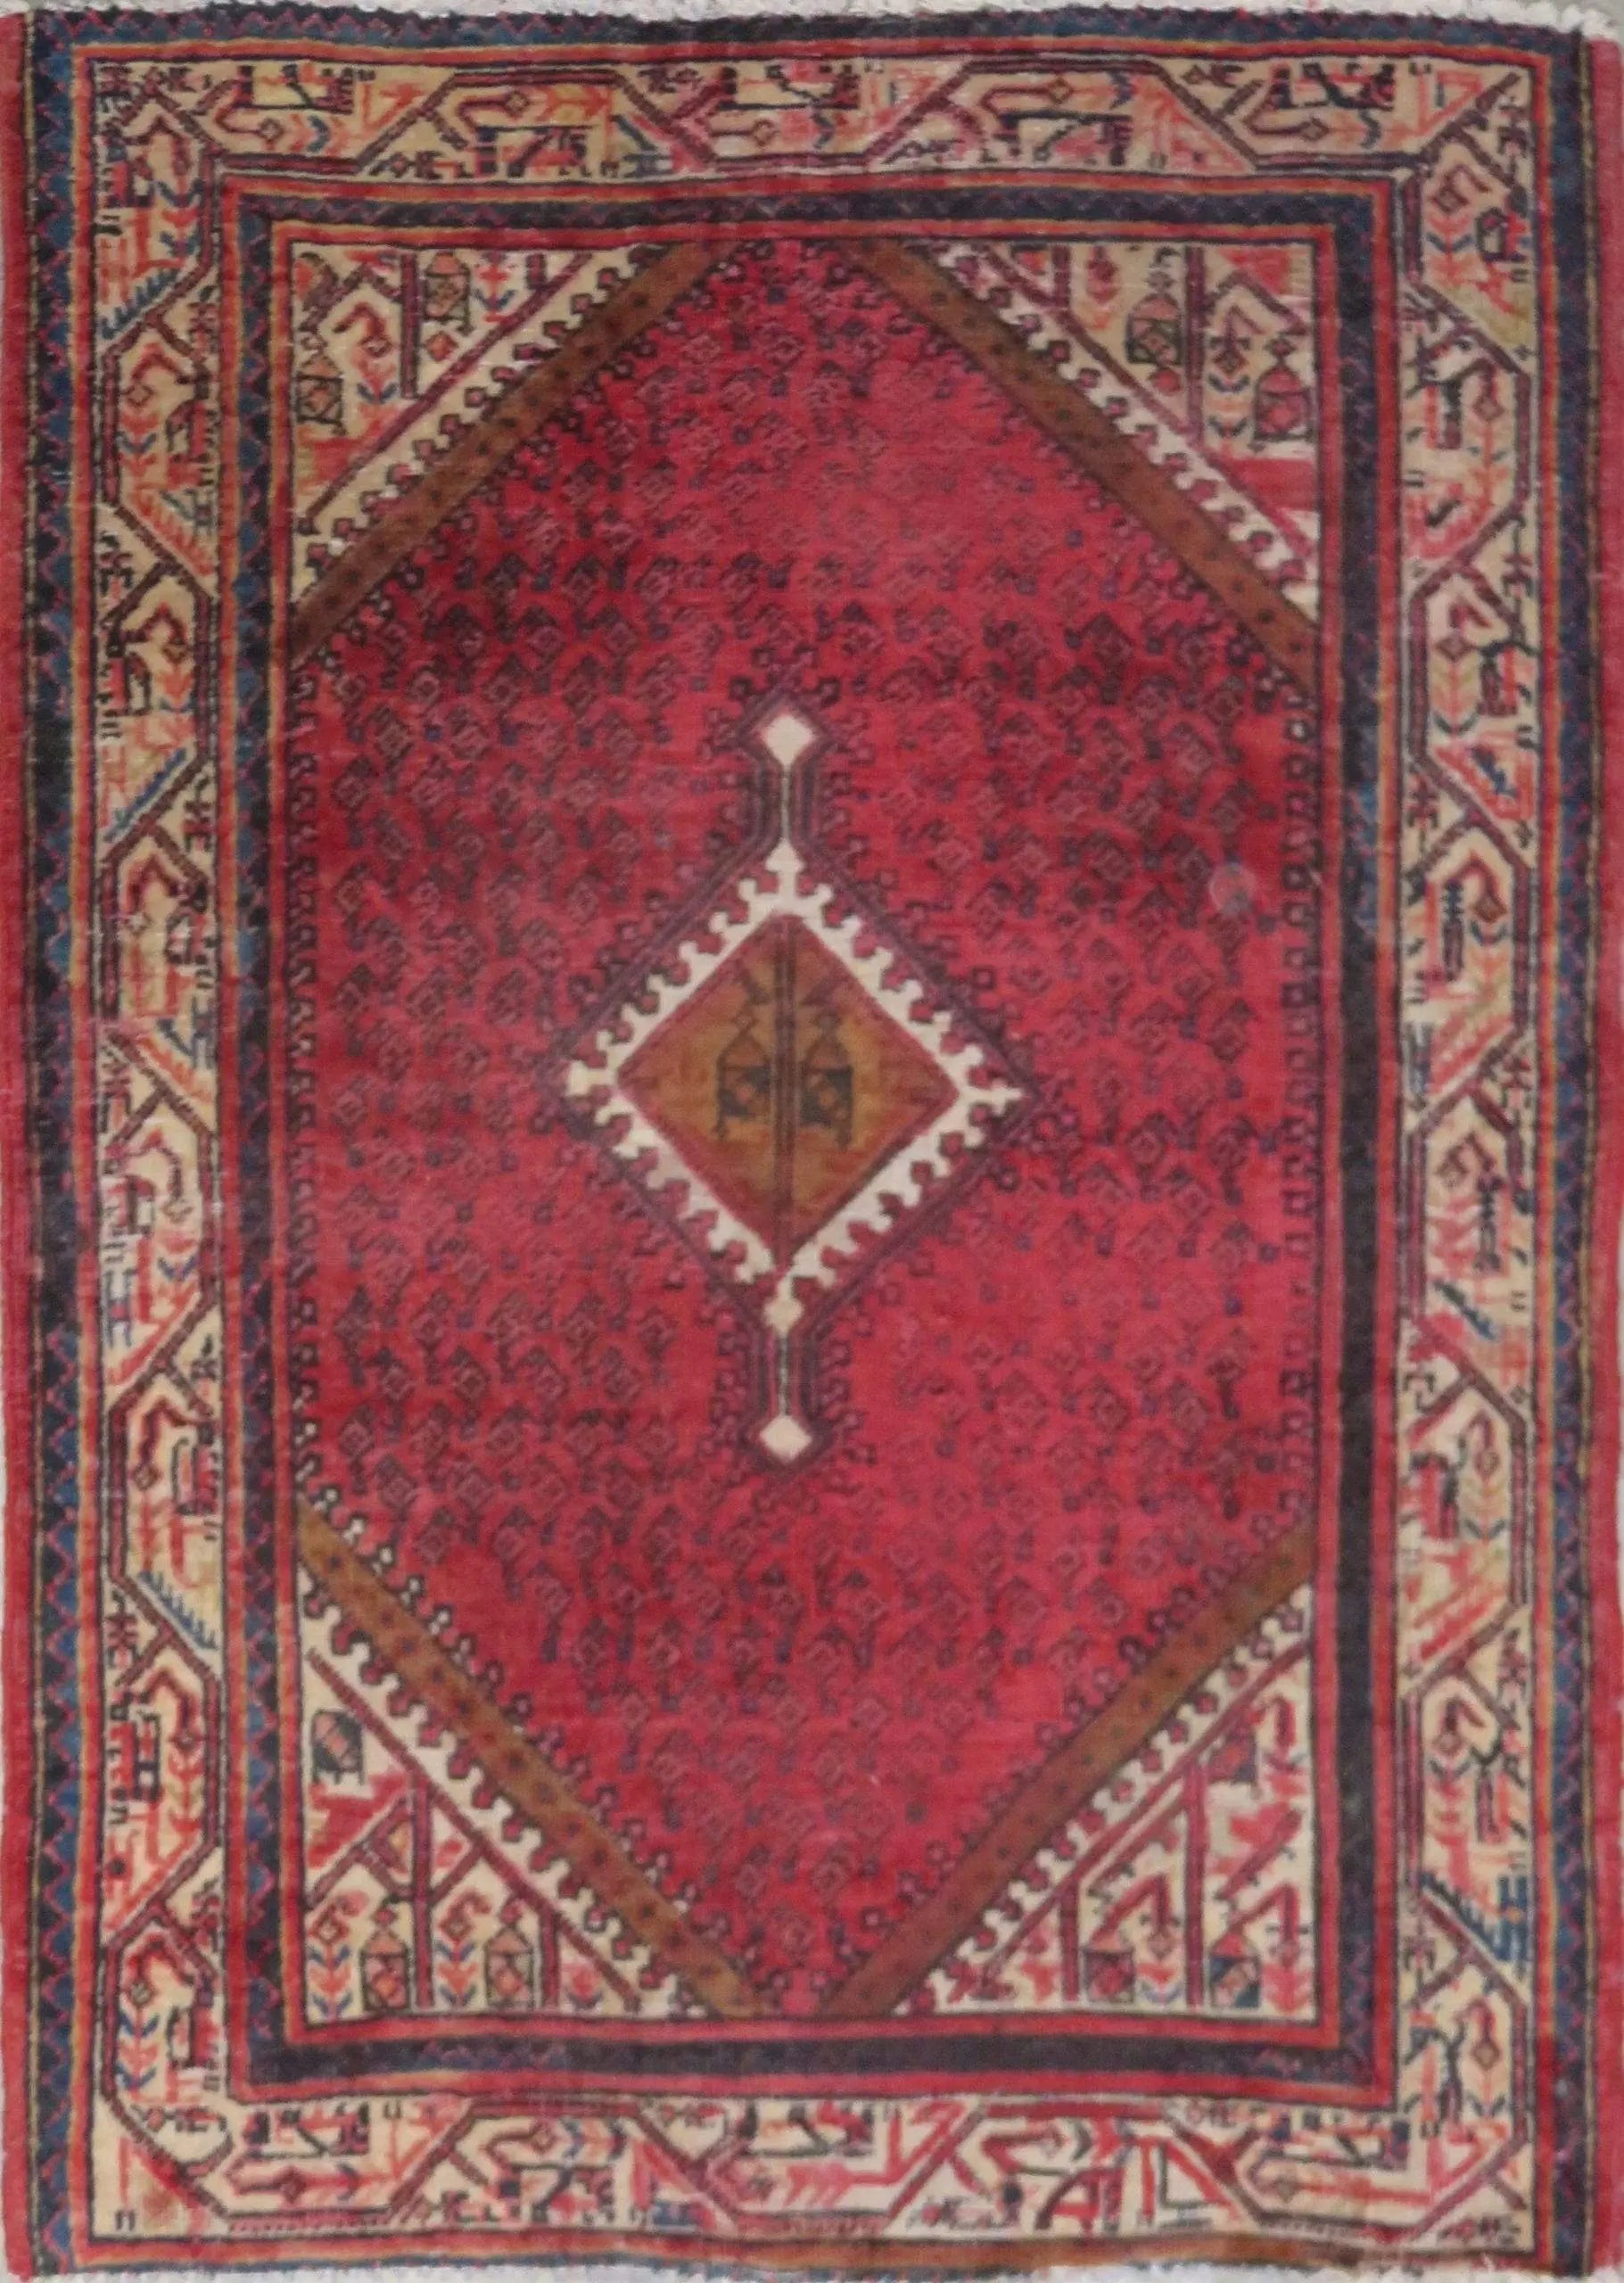 Hand-Knotted Persian Wool Rug _ Luxurious Vintage Design, 4'7" x 3'3", Artisan Crafted